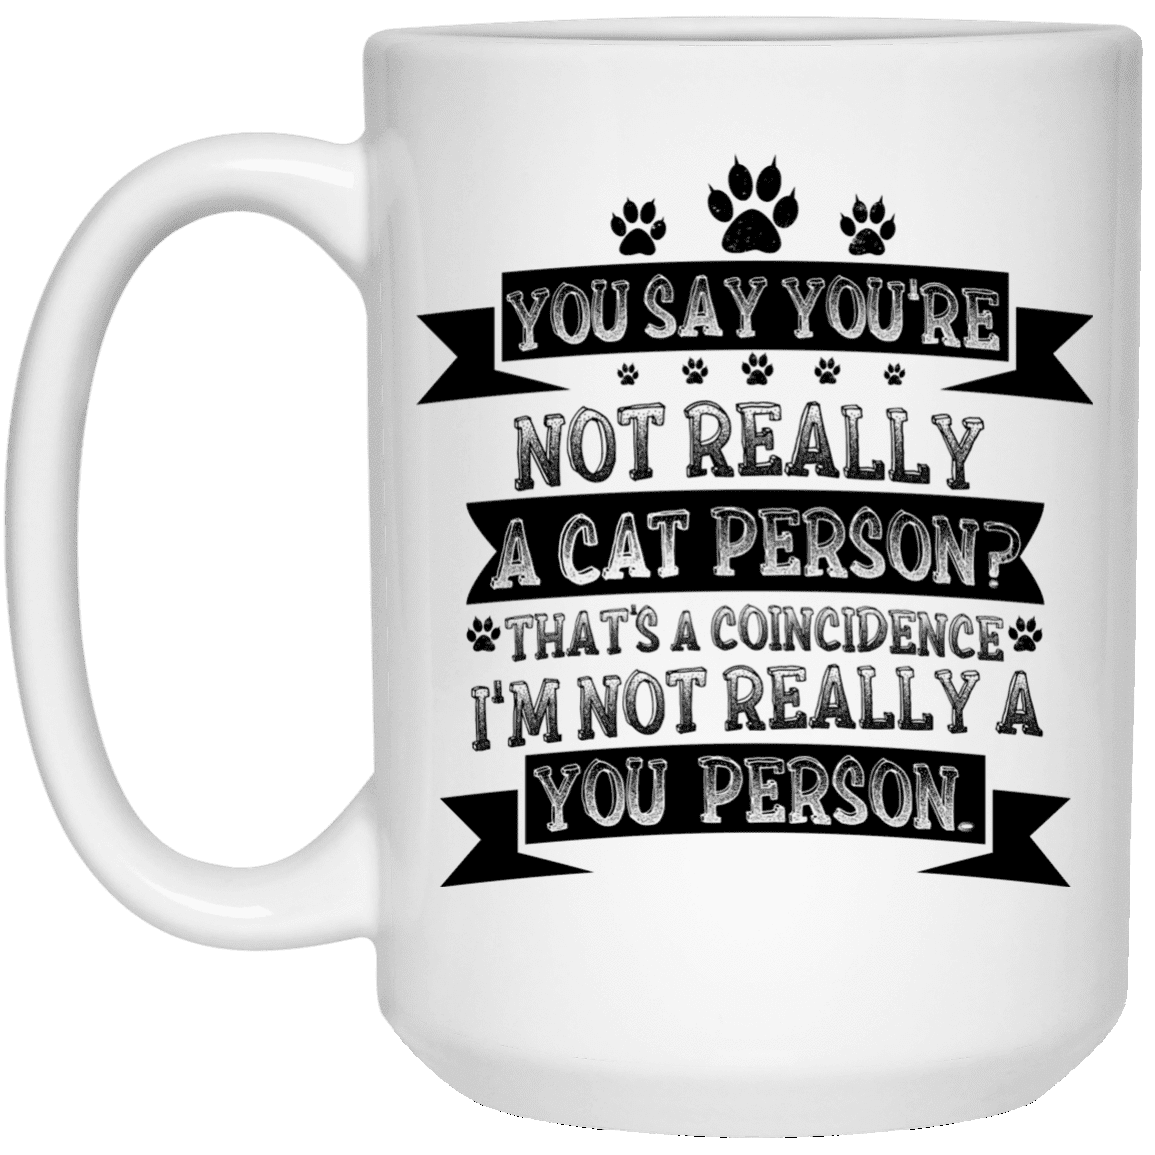 Not A Cat Person - Mugs.